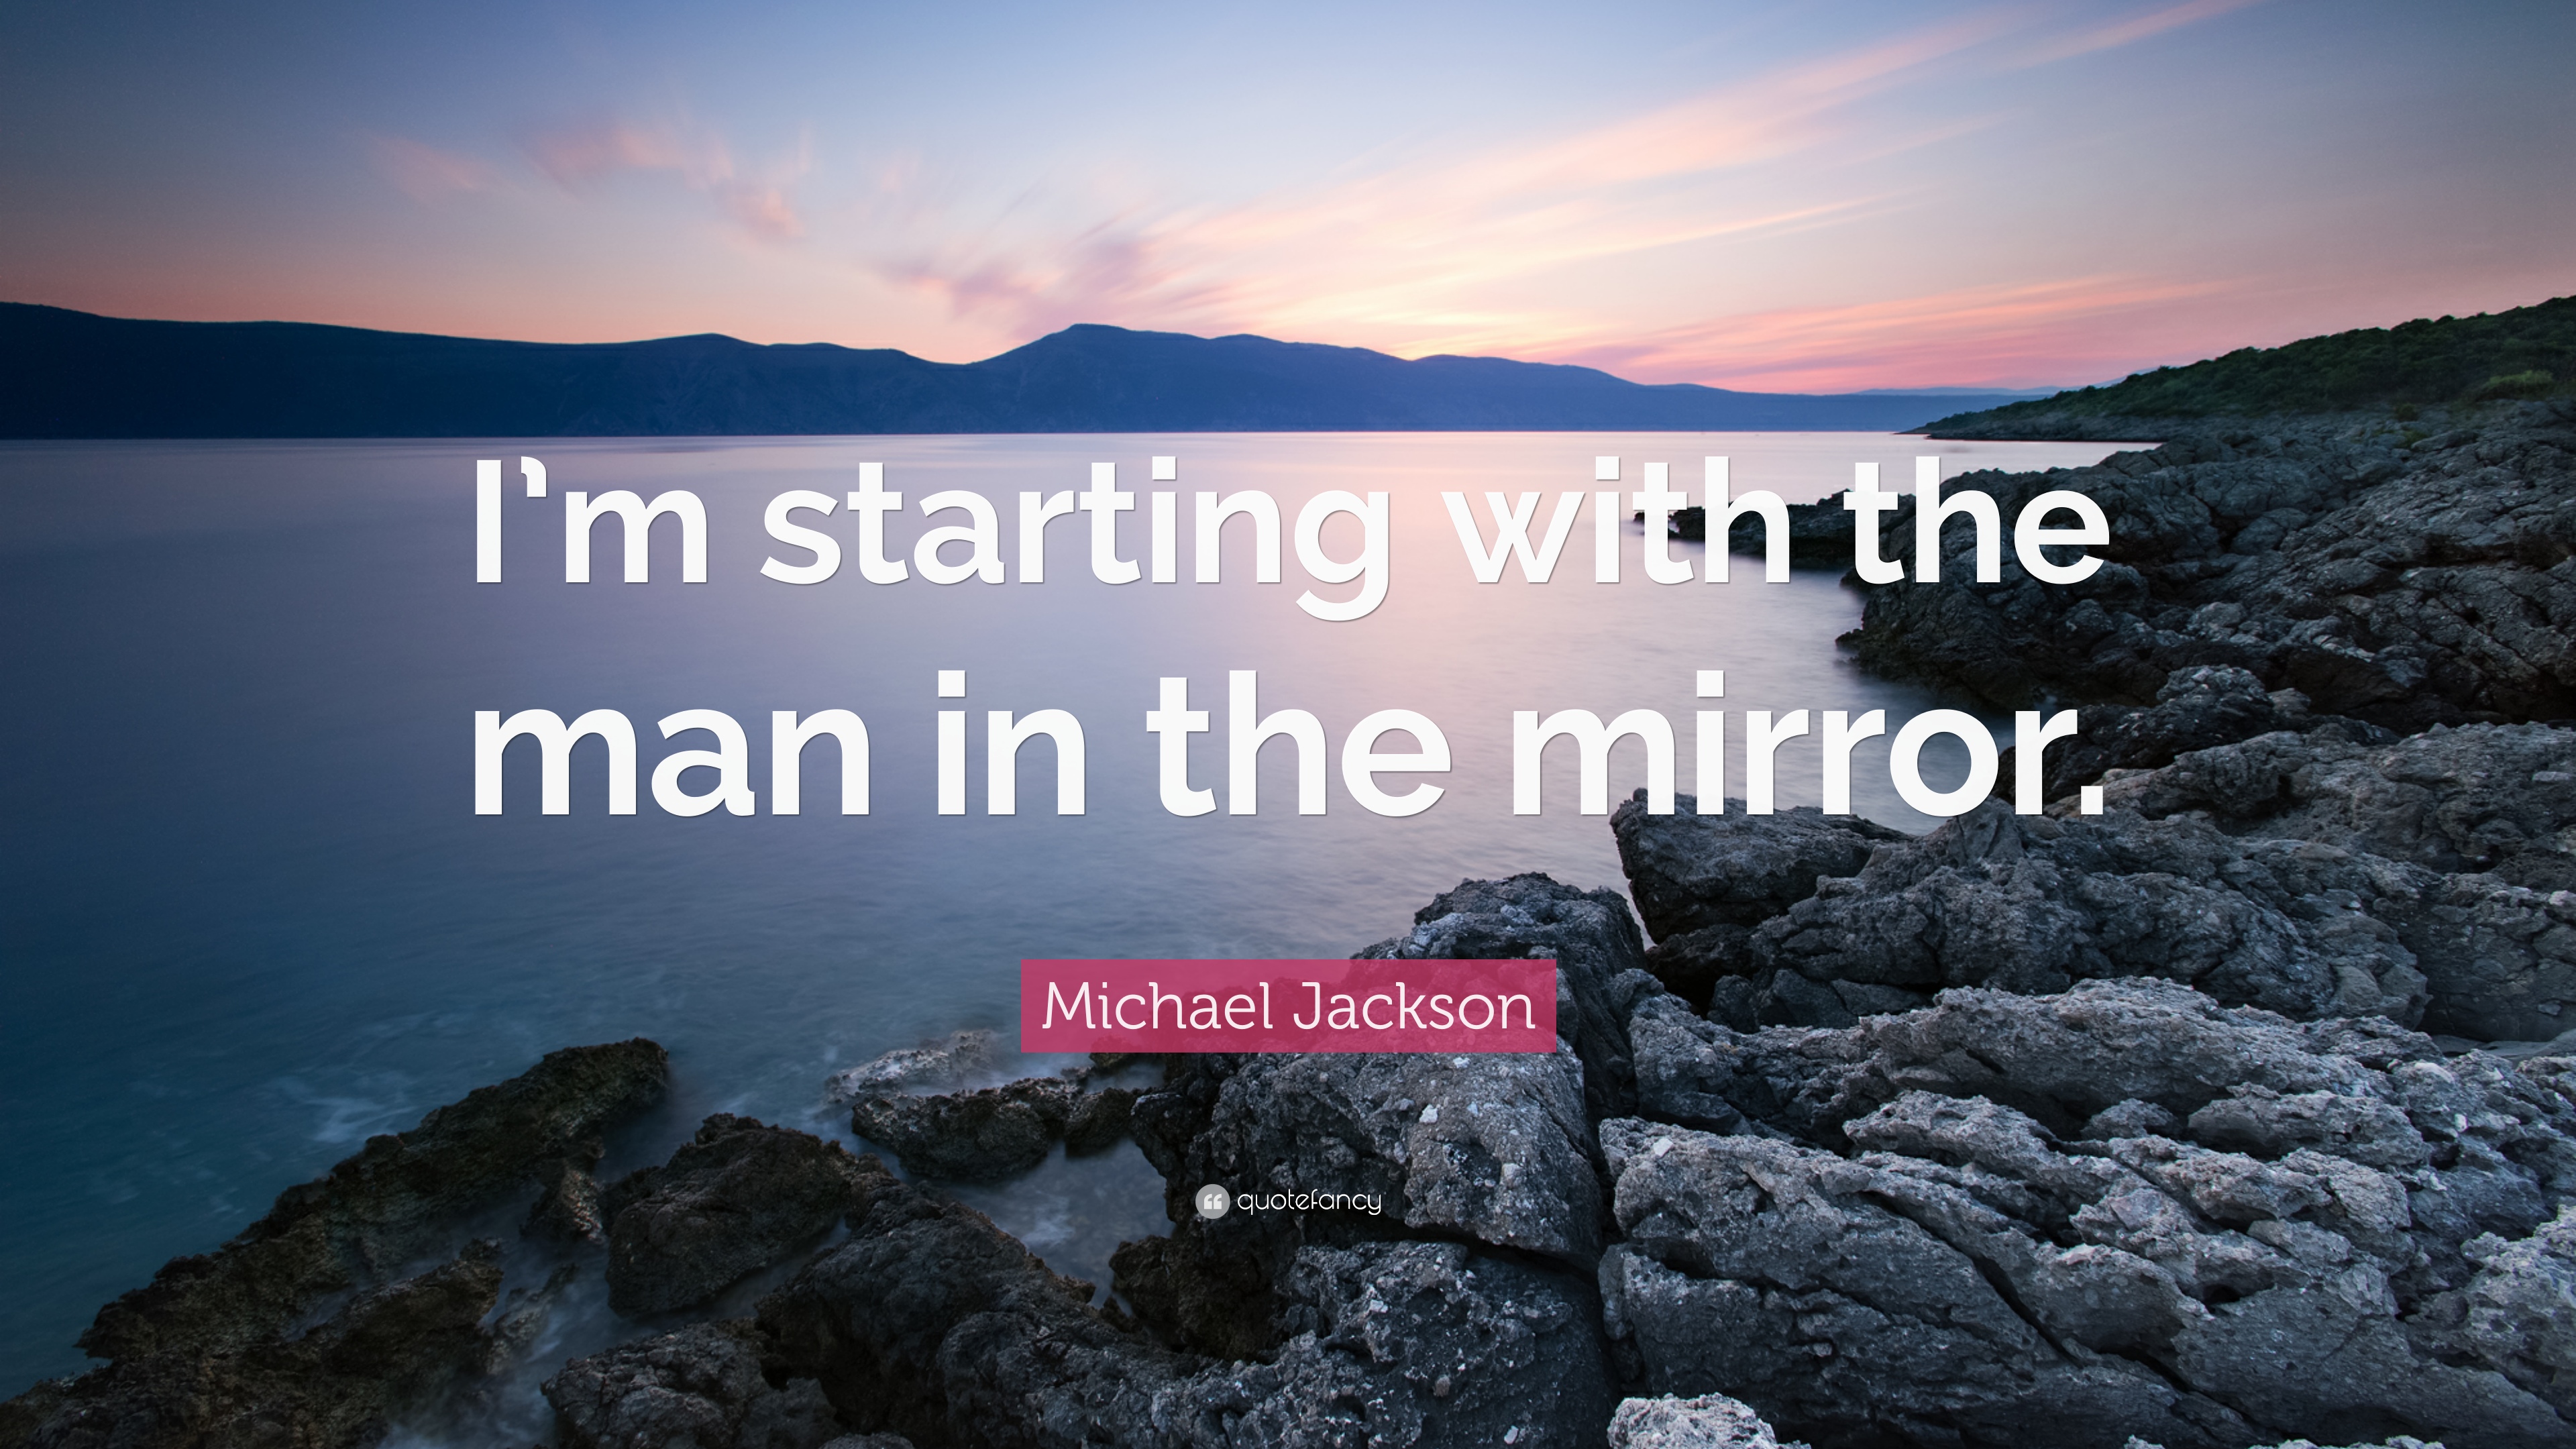 Michael Jackson Quote: “I'm starting with the man in the mirror